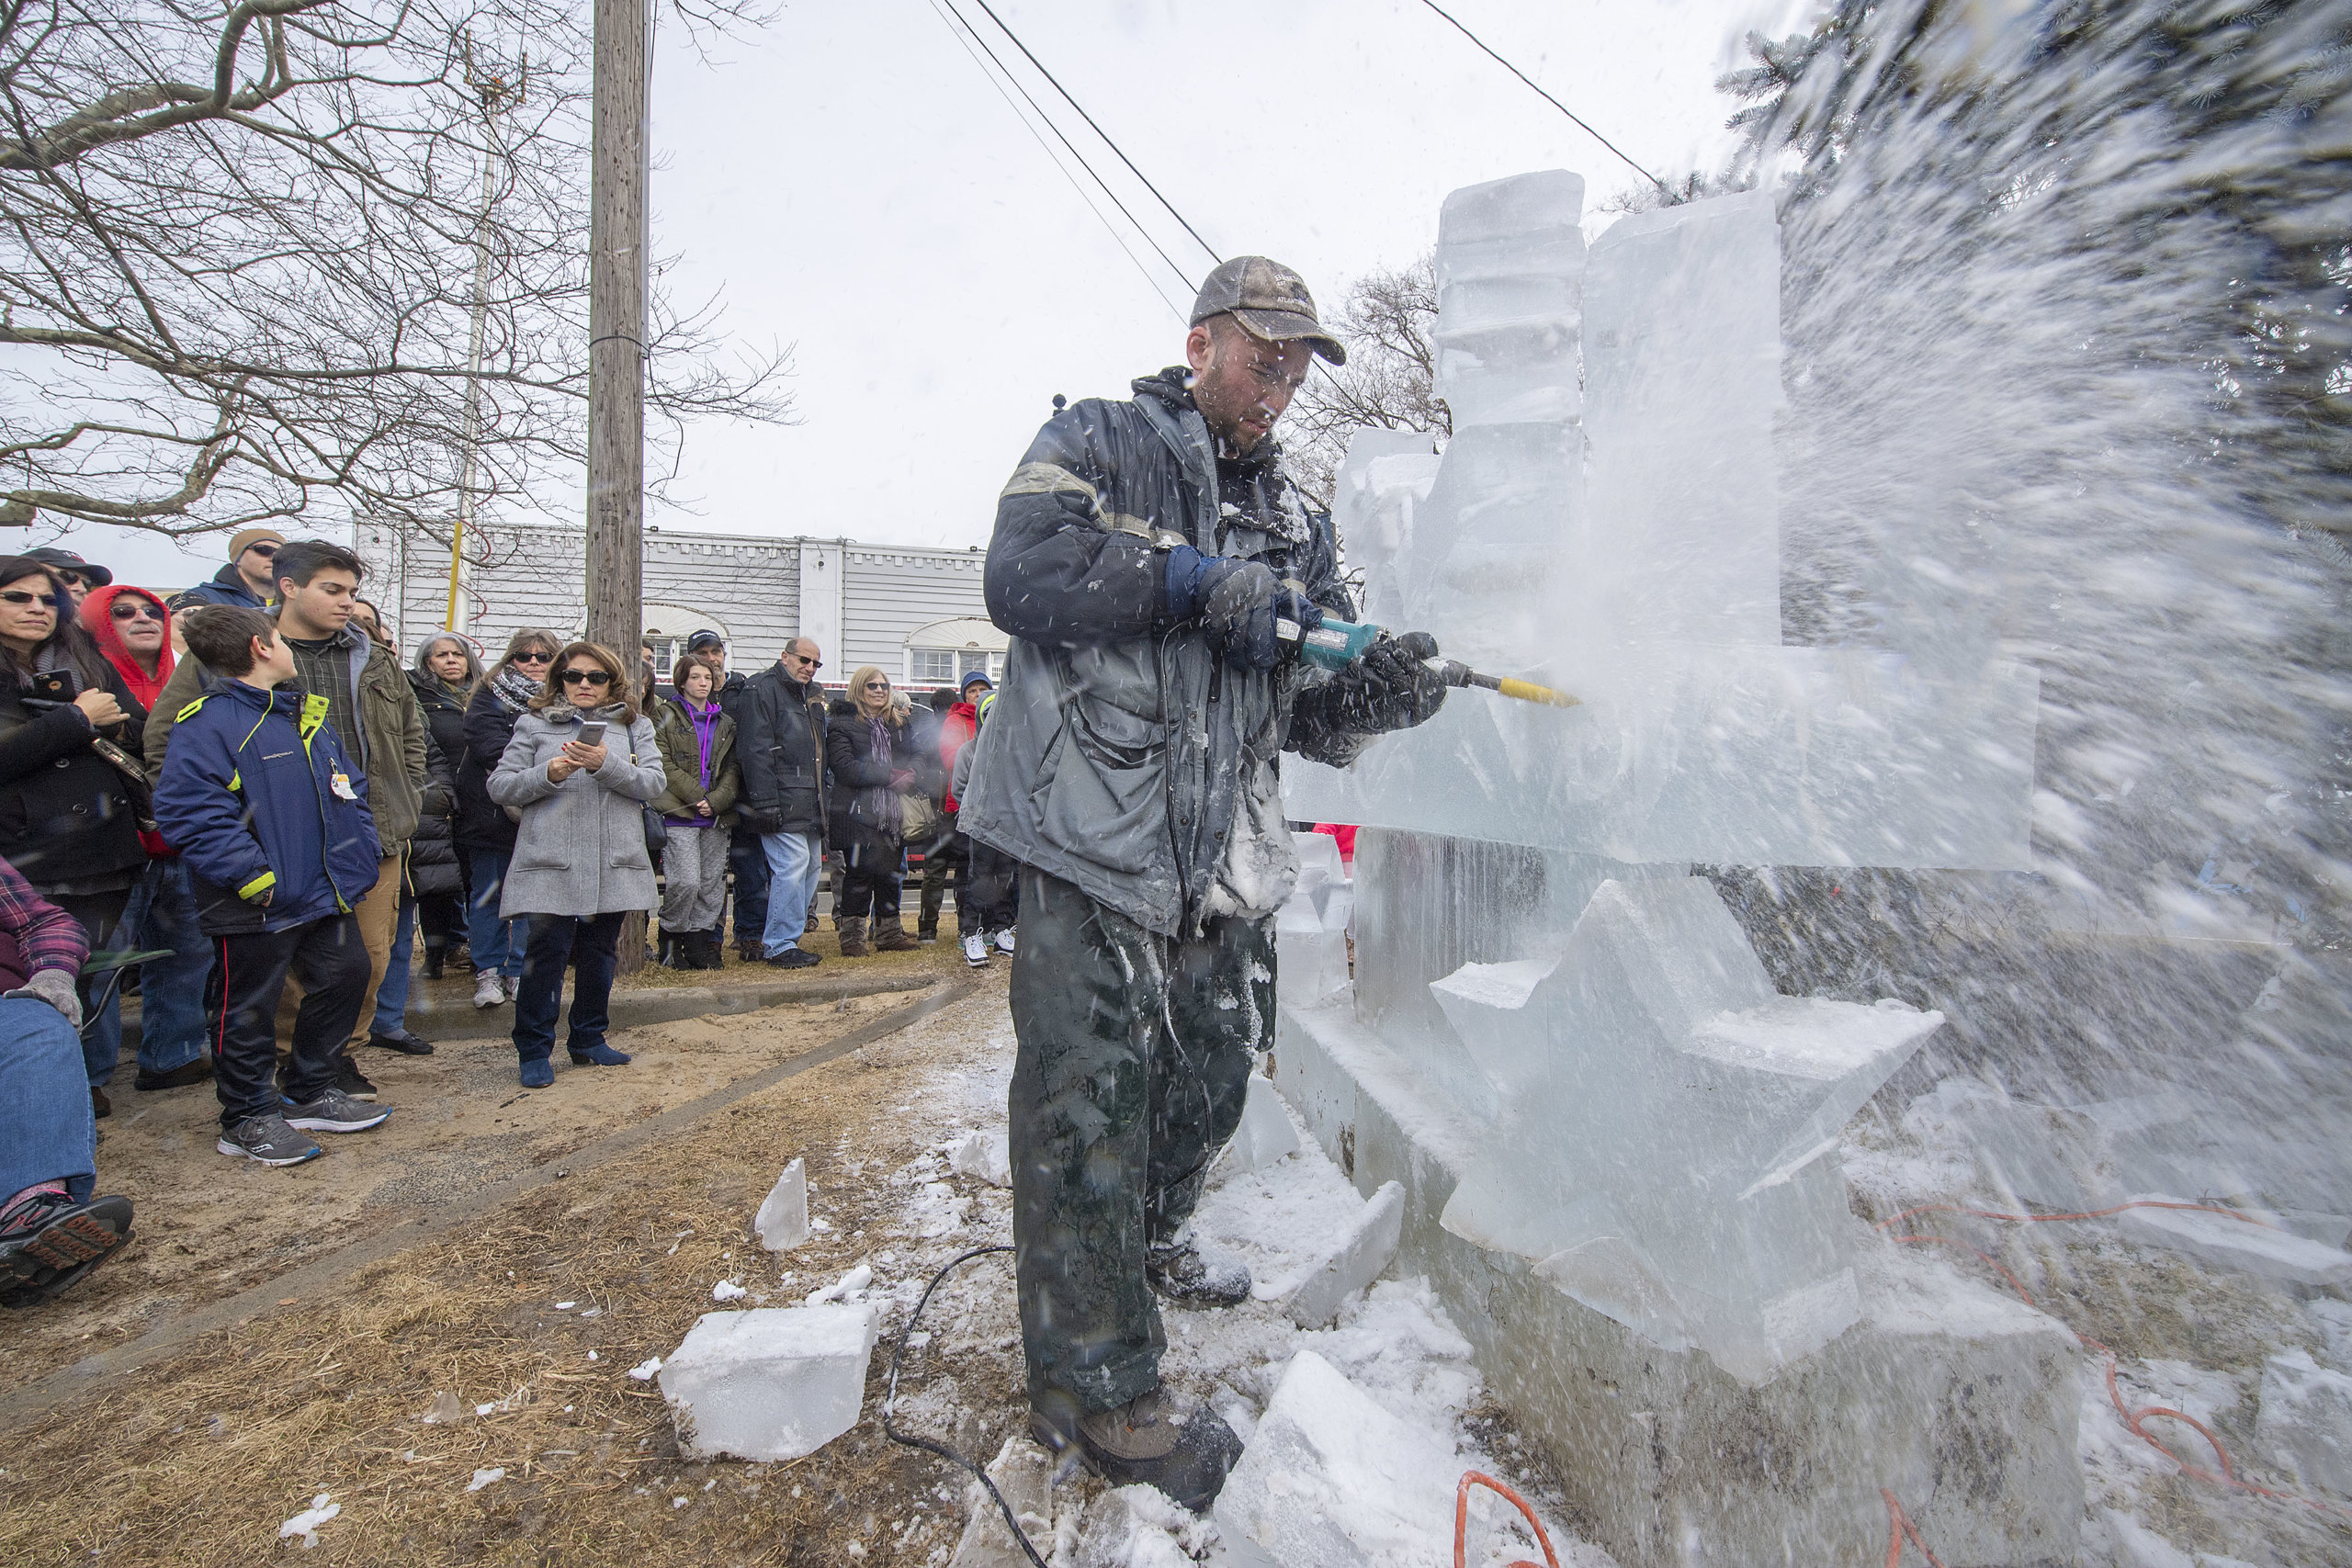 Rich Daly of Ice Melodies carving an ice sculpture on Long Wharf during HarborFrost 2019.